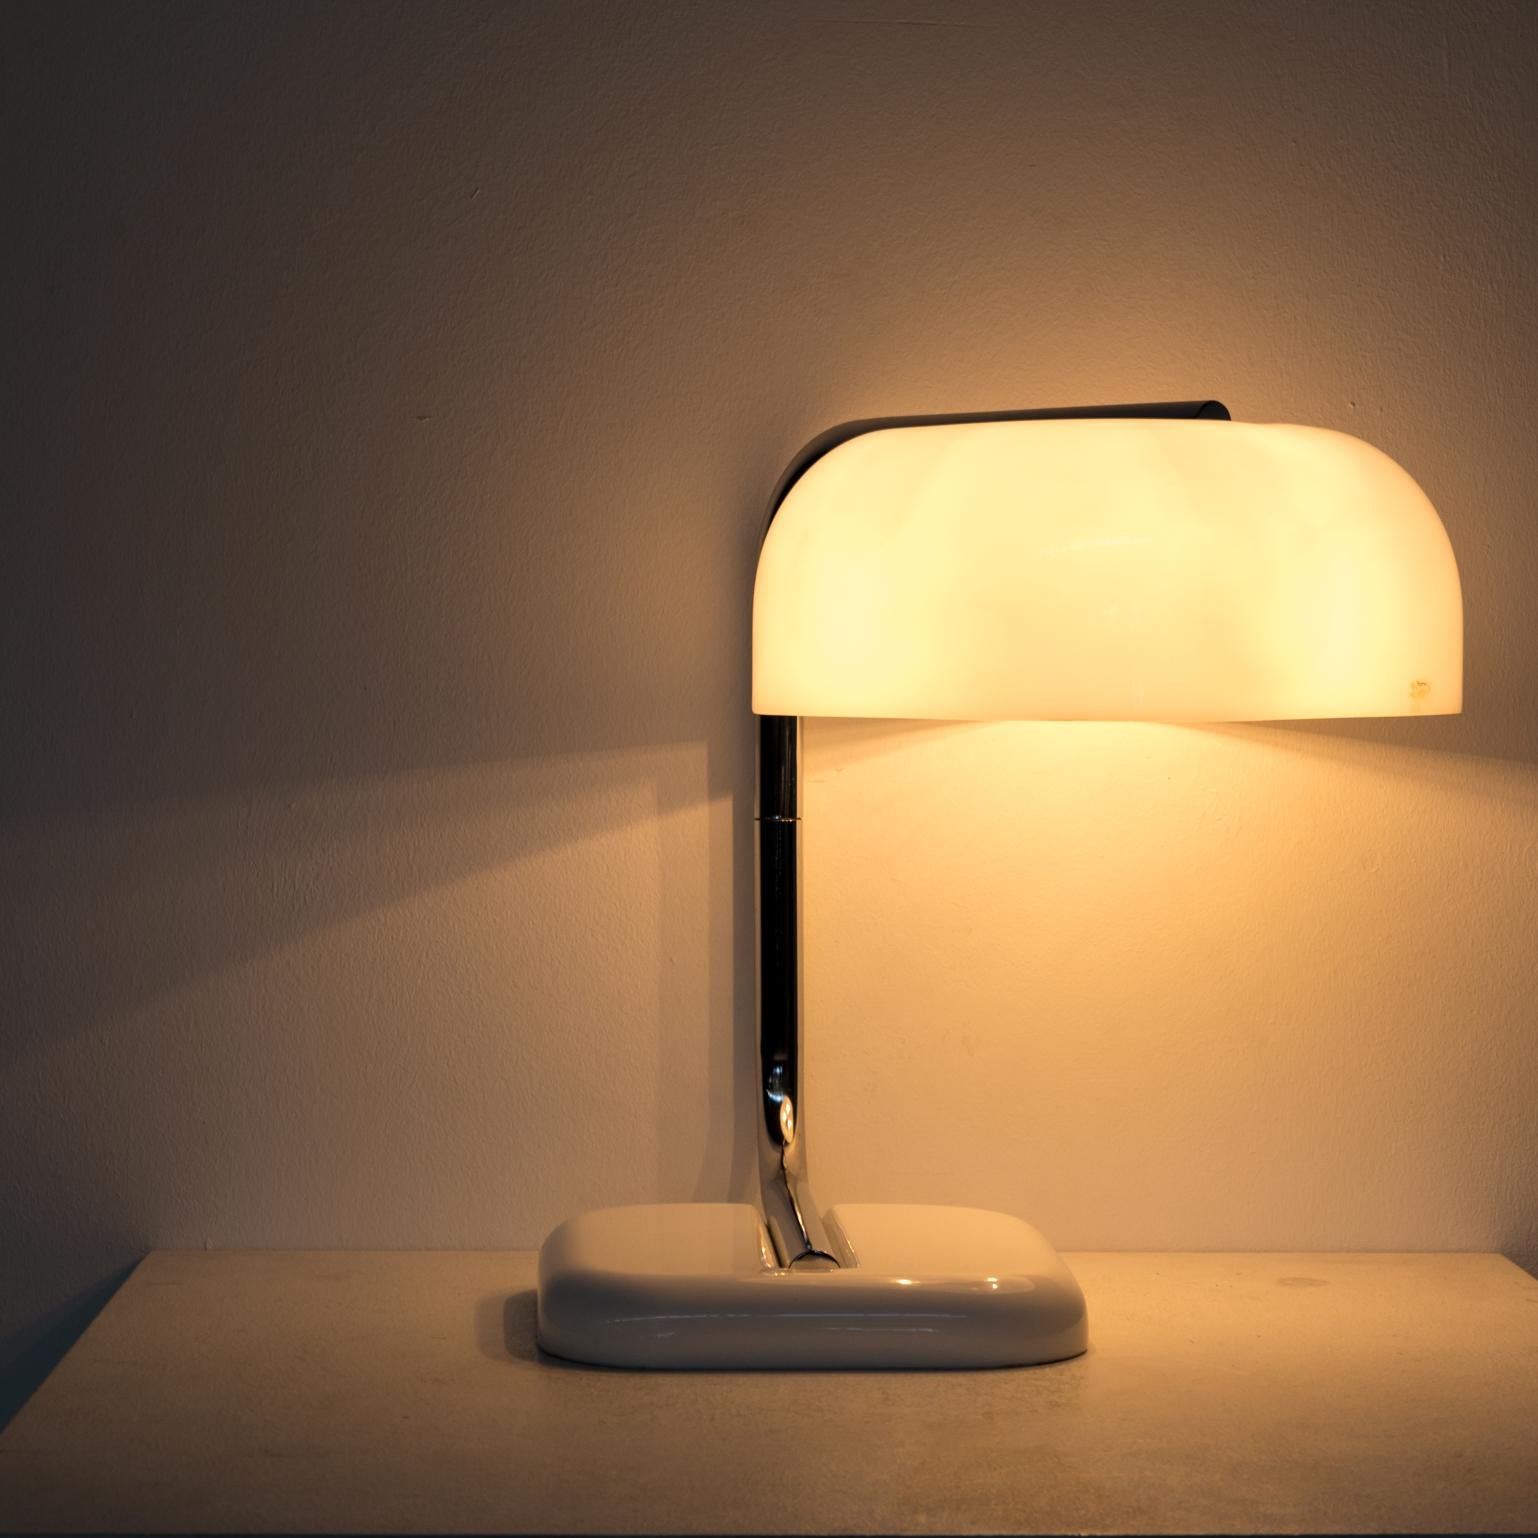 1970s Guzinni Square and Turnable Table Lamp In Good Condition For Sale In Amstelveen, Noord